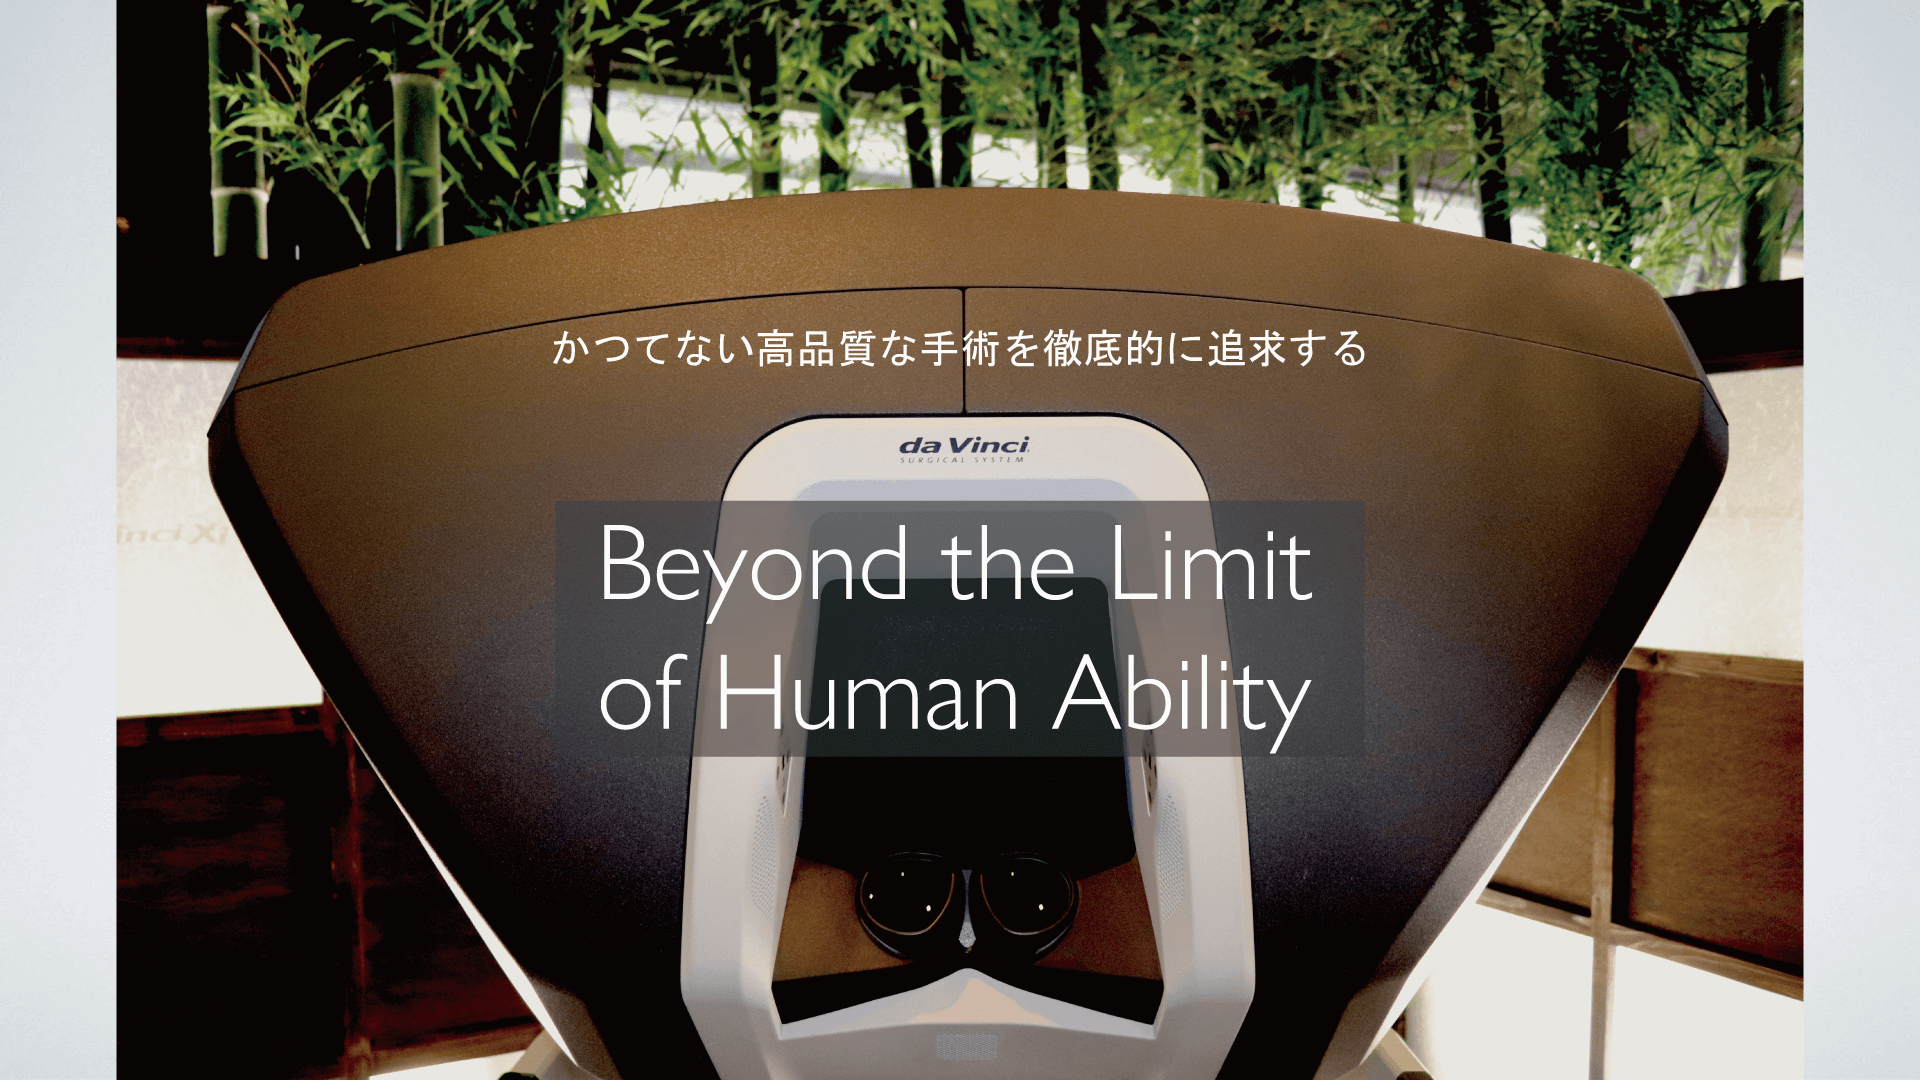 Beyond the Limit of Human Ability